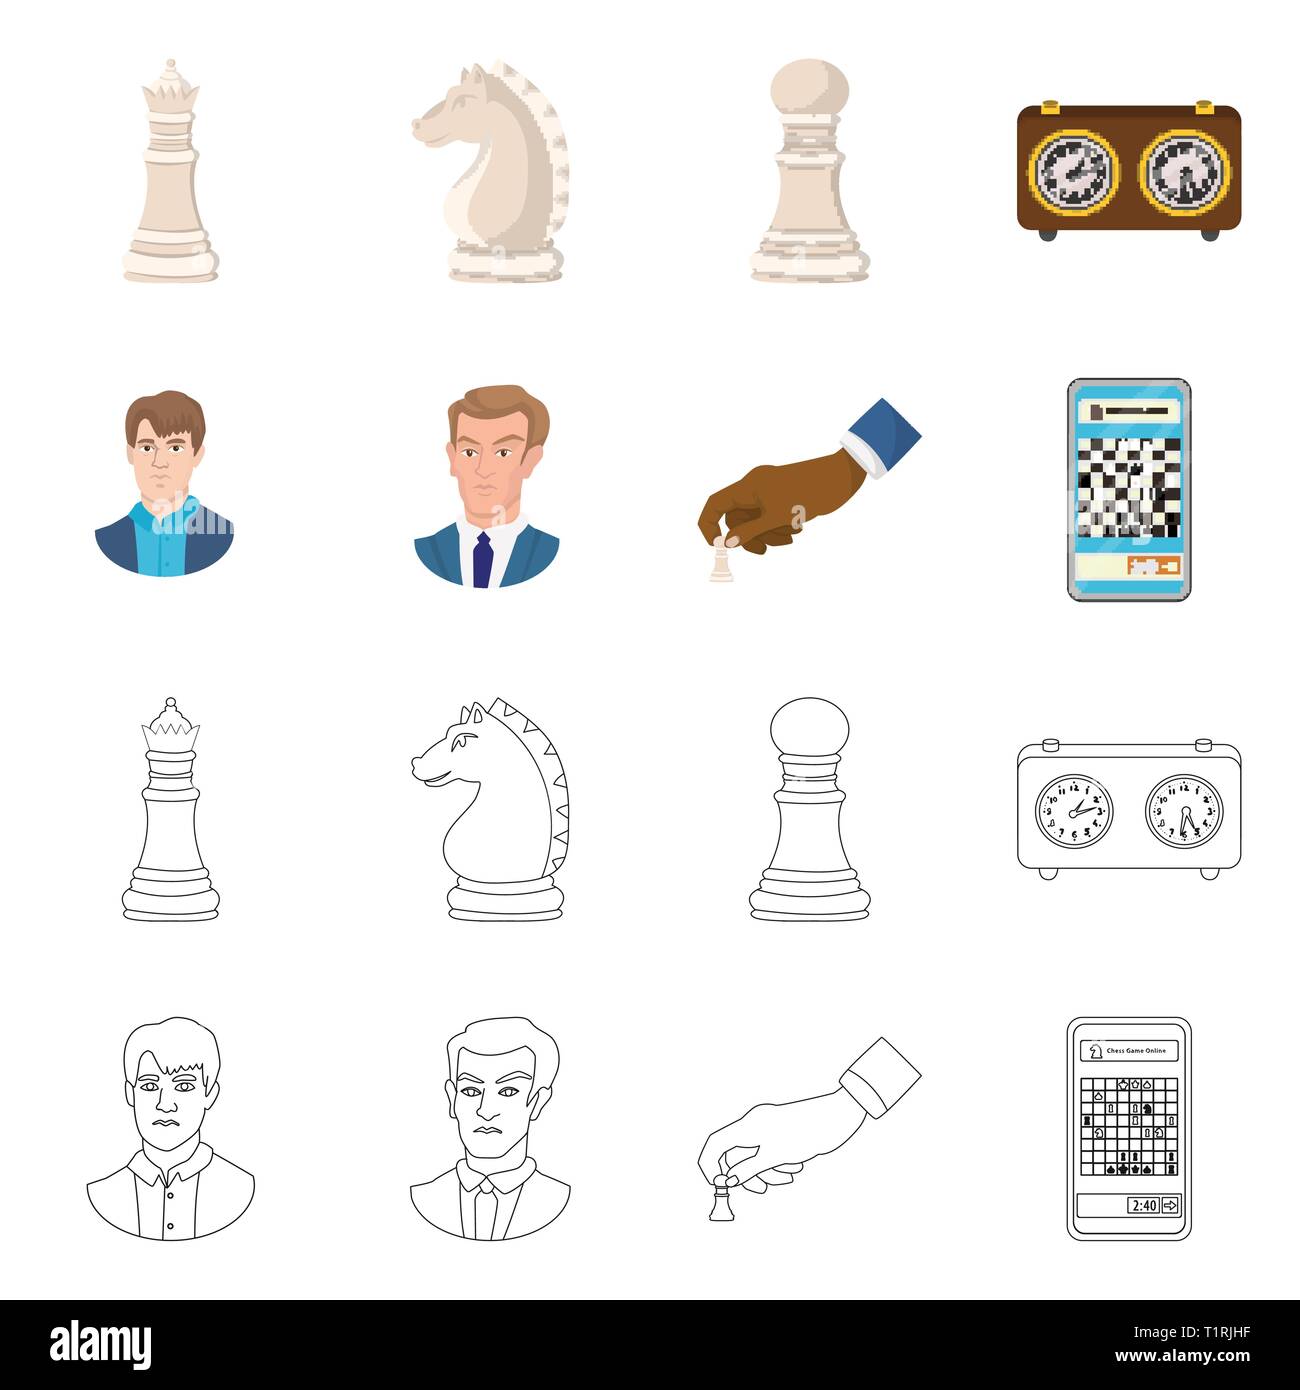 queen,knight,pawn,clock,man,hand,mobile,board,horse,timer,face,businessman,app,white,speed,male,profile,concept,phone,mate,figure,young,business,technology,check,head,counter,button,guy,African,checkmate,thin,club,target,chess,game,piece,strategy,tactical,play,set,vector,icon,illustration,isolated,collection,design,element,graphic,sign Vector Vectors , Stock Vector